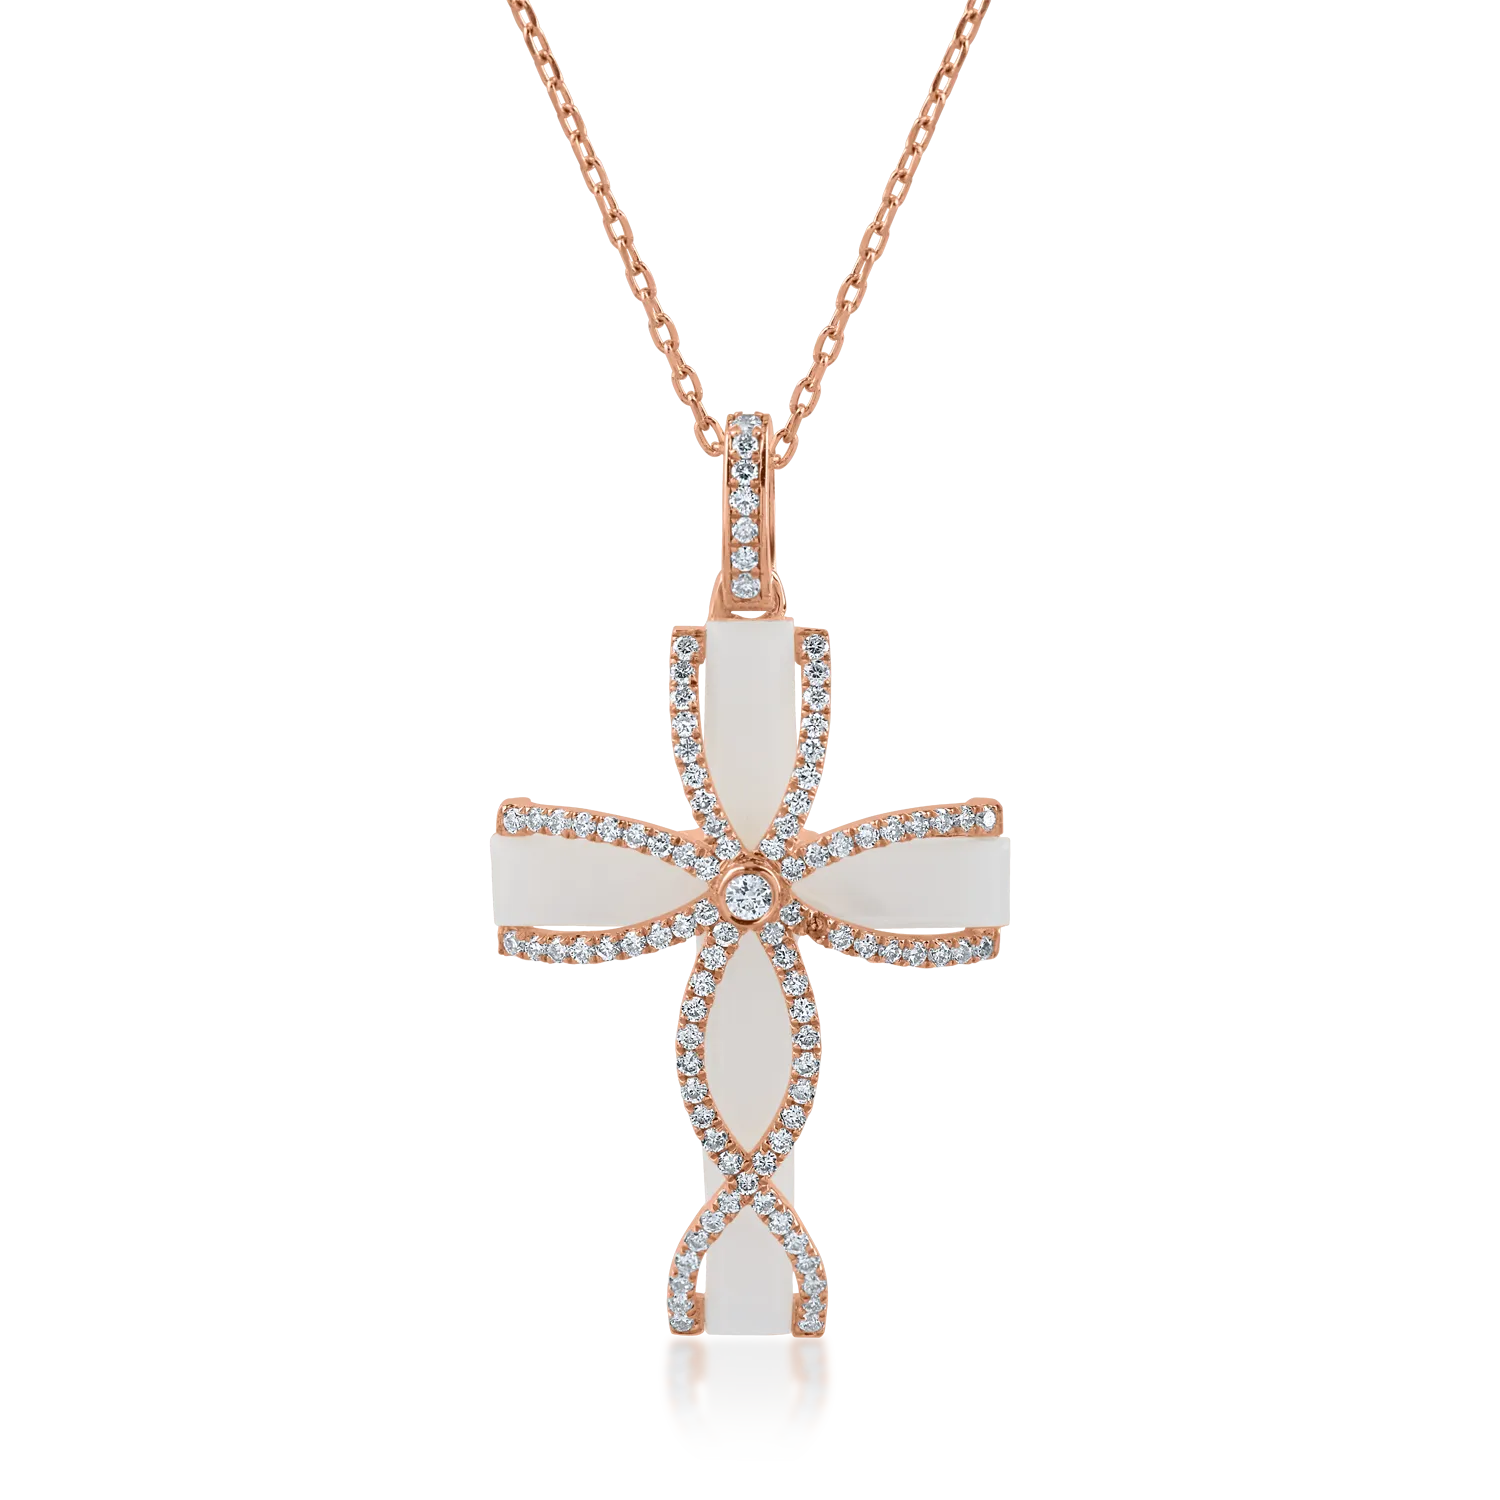 Rose gold cross pendant necklace with 2.1ct mother of pearl and 0.31ct diamonds